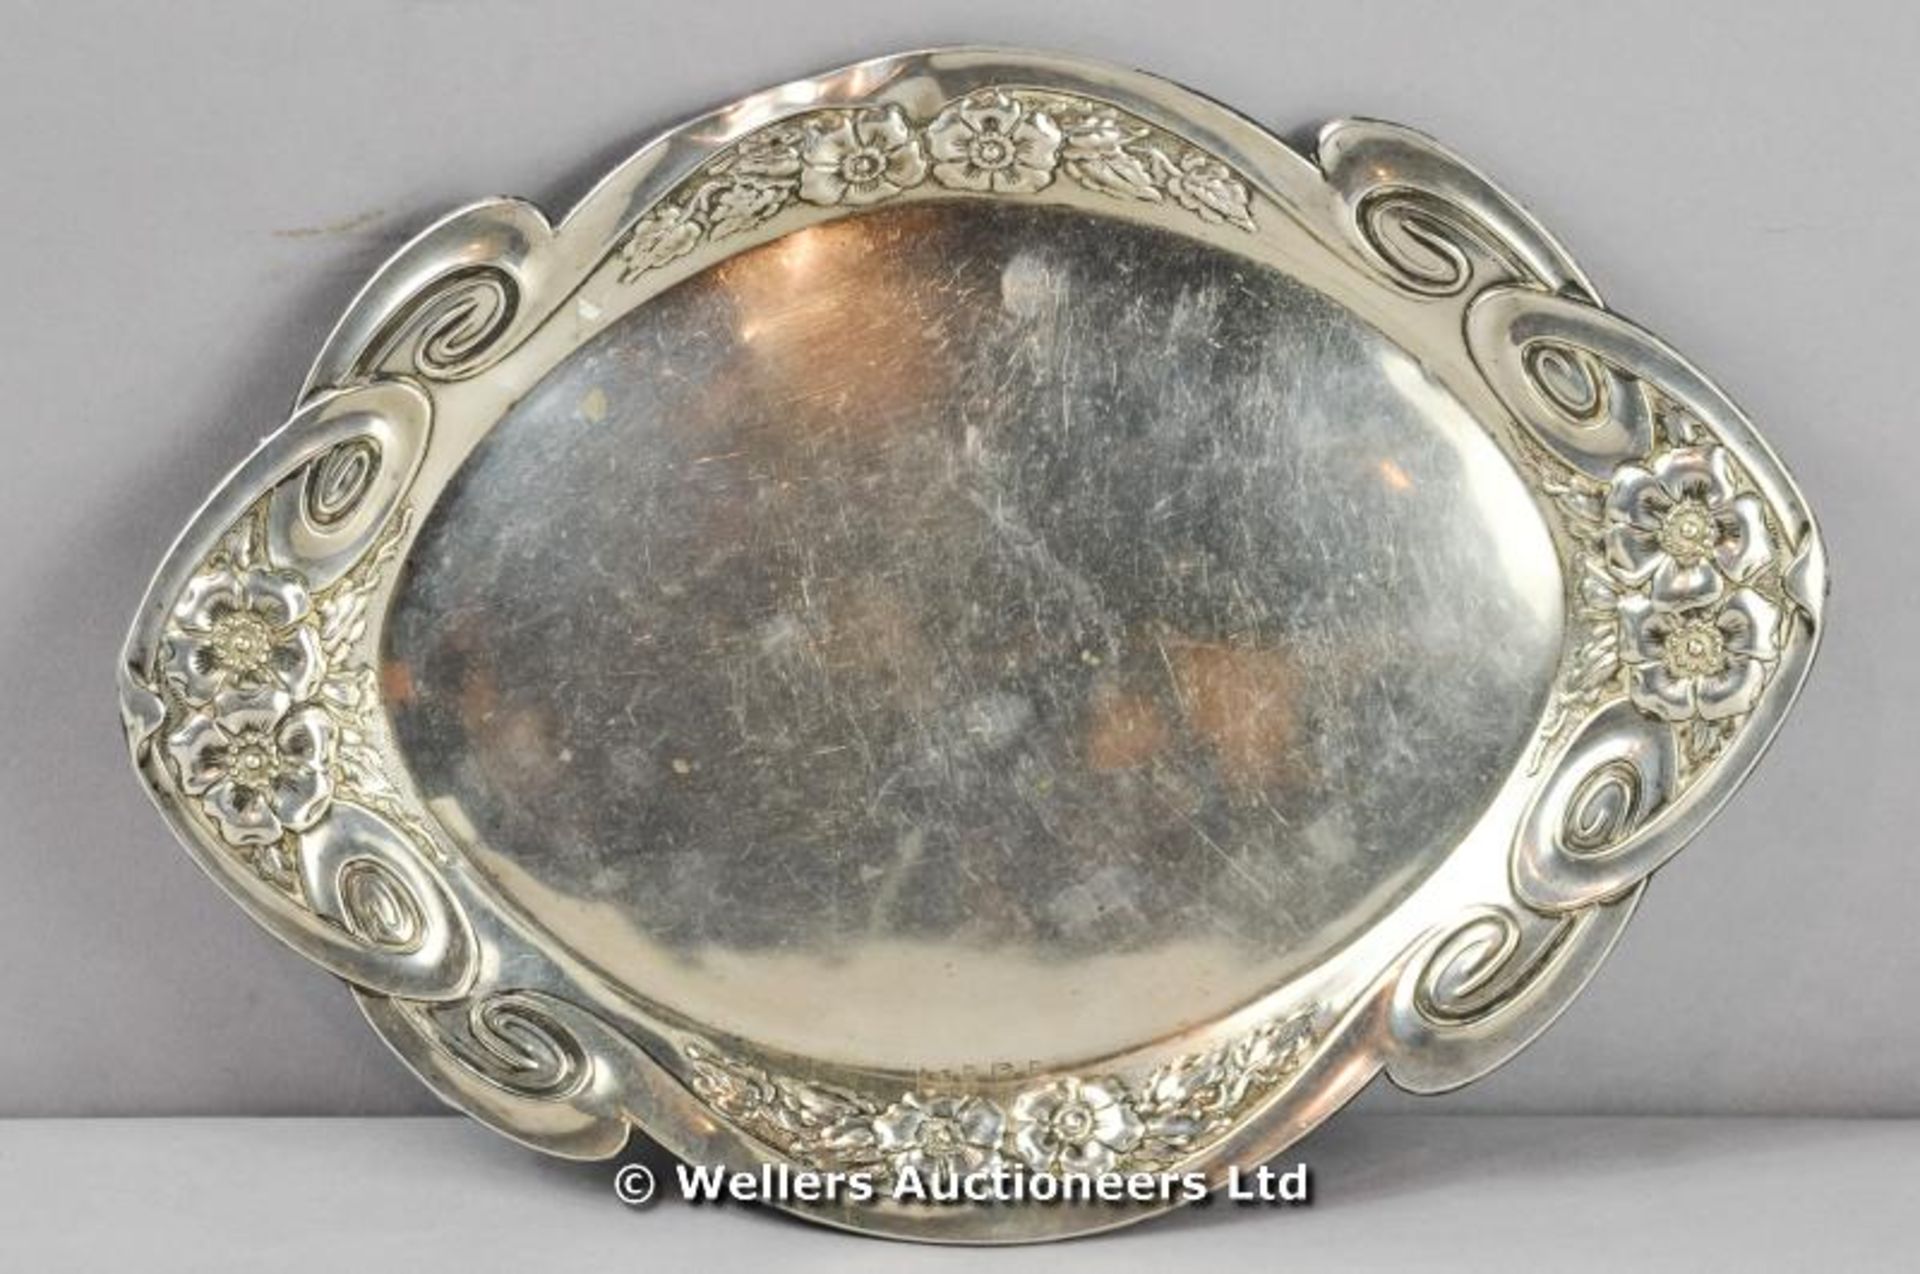 *A silver oval small platter with Art Nouveau decoration, Birmingham 1910, 204 gms (Lot subject to